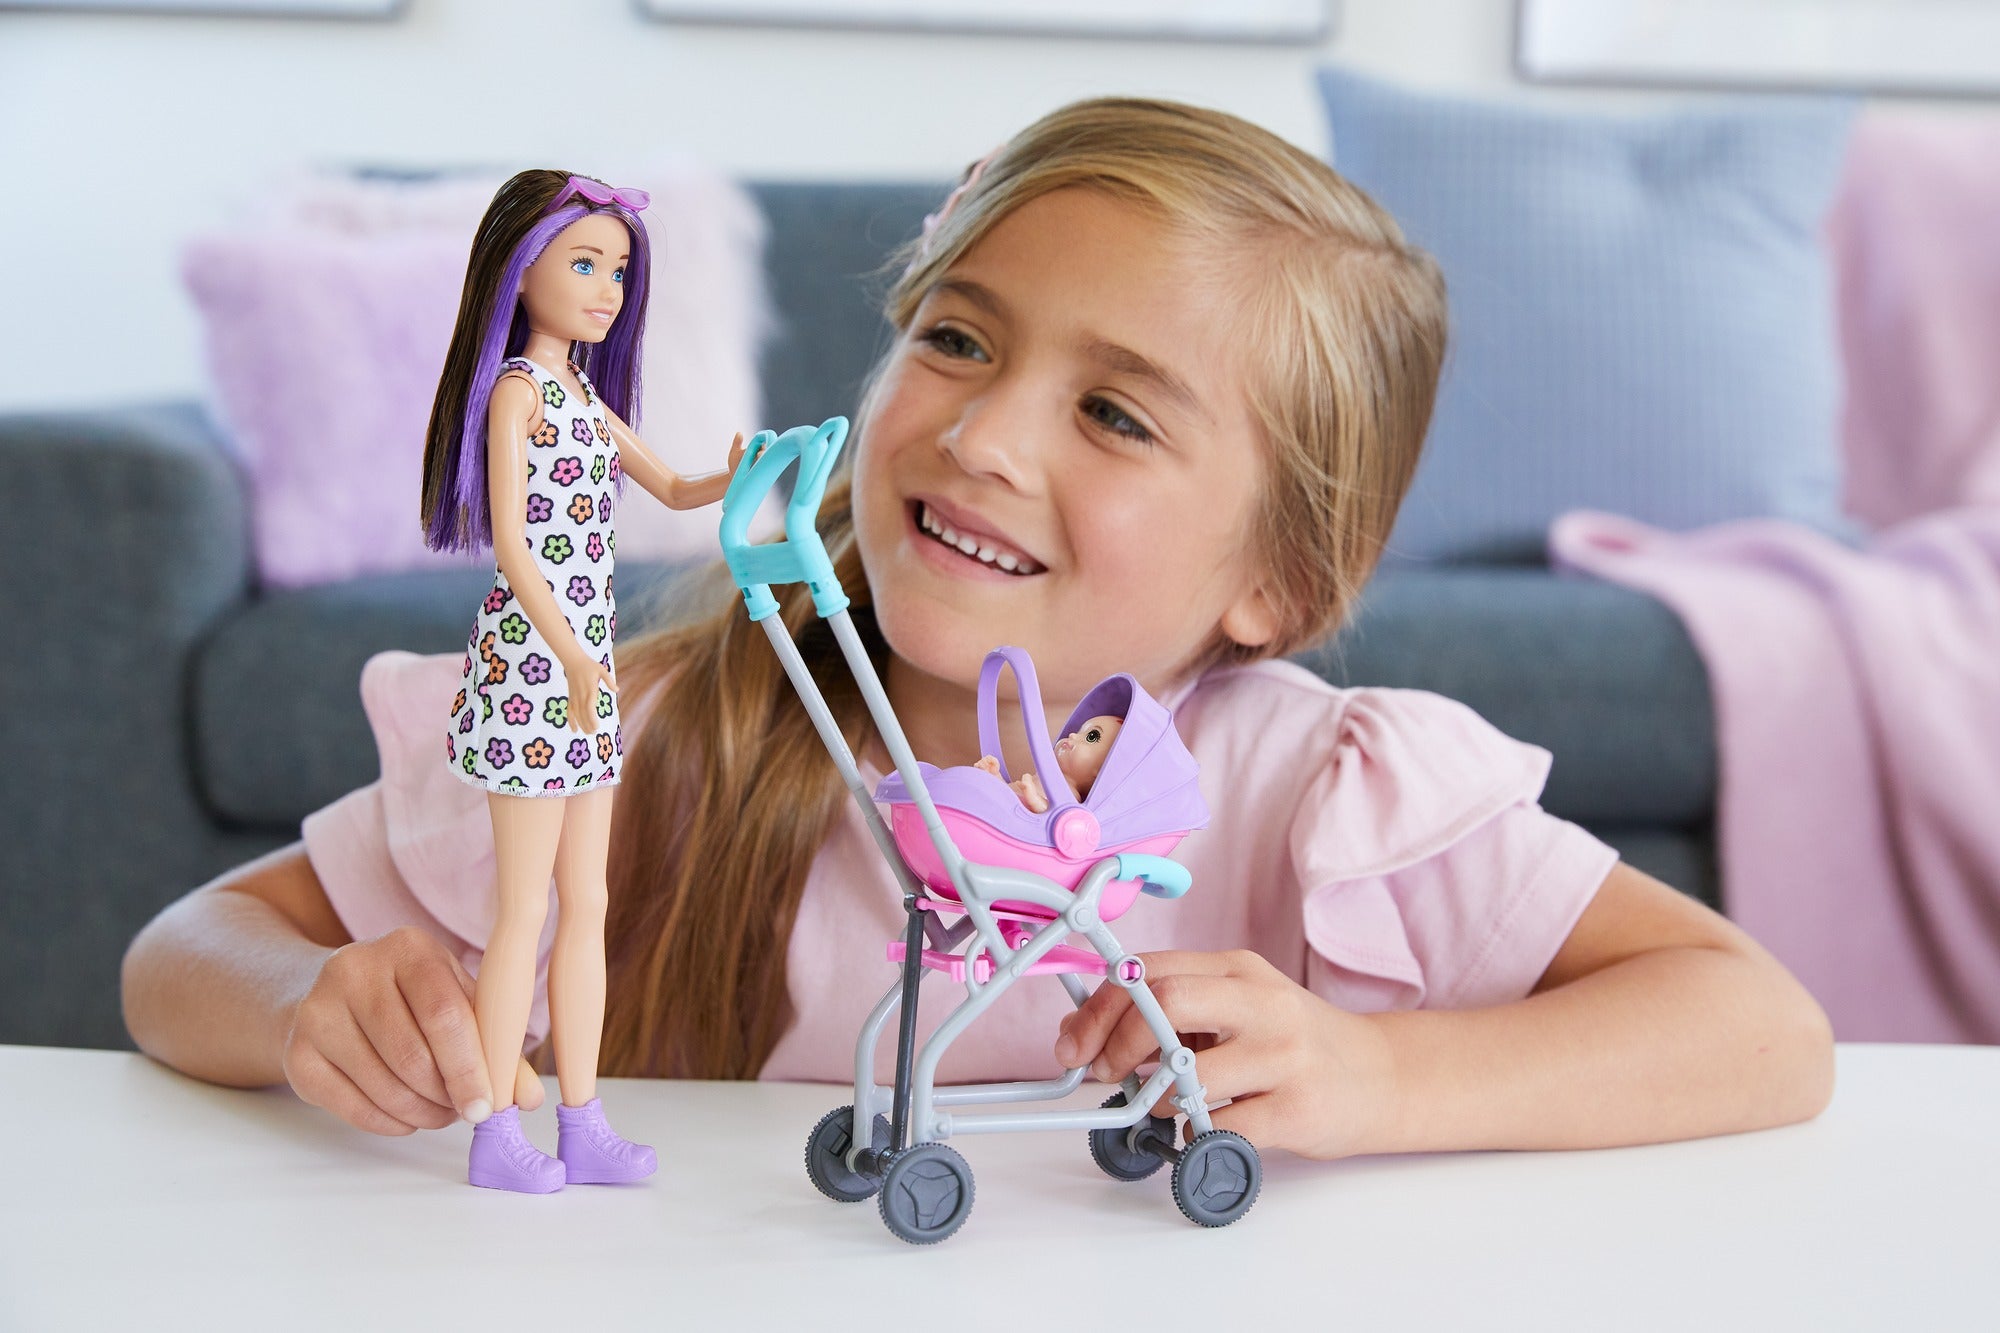 Barbie Skipper Babysitters Inc. Stroller Playset And Doll